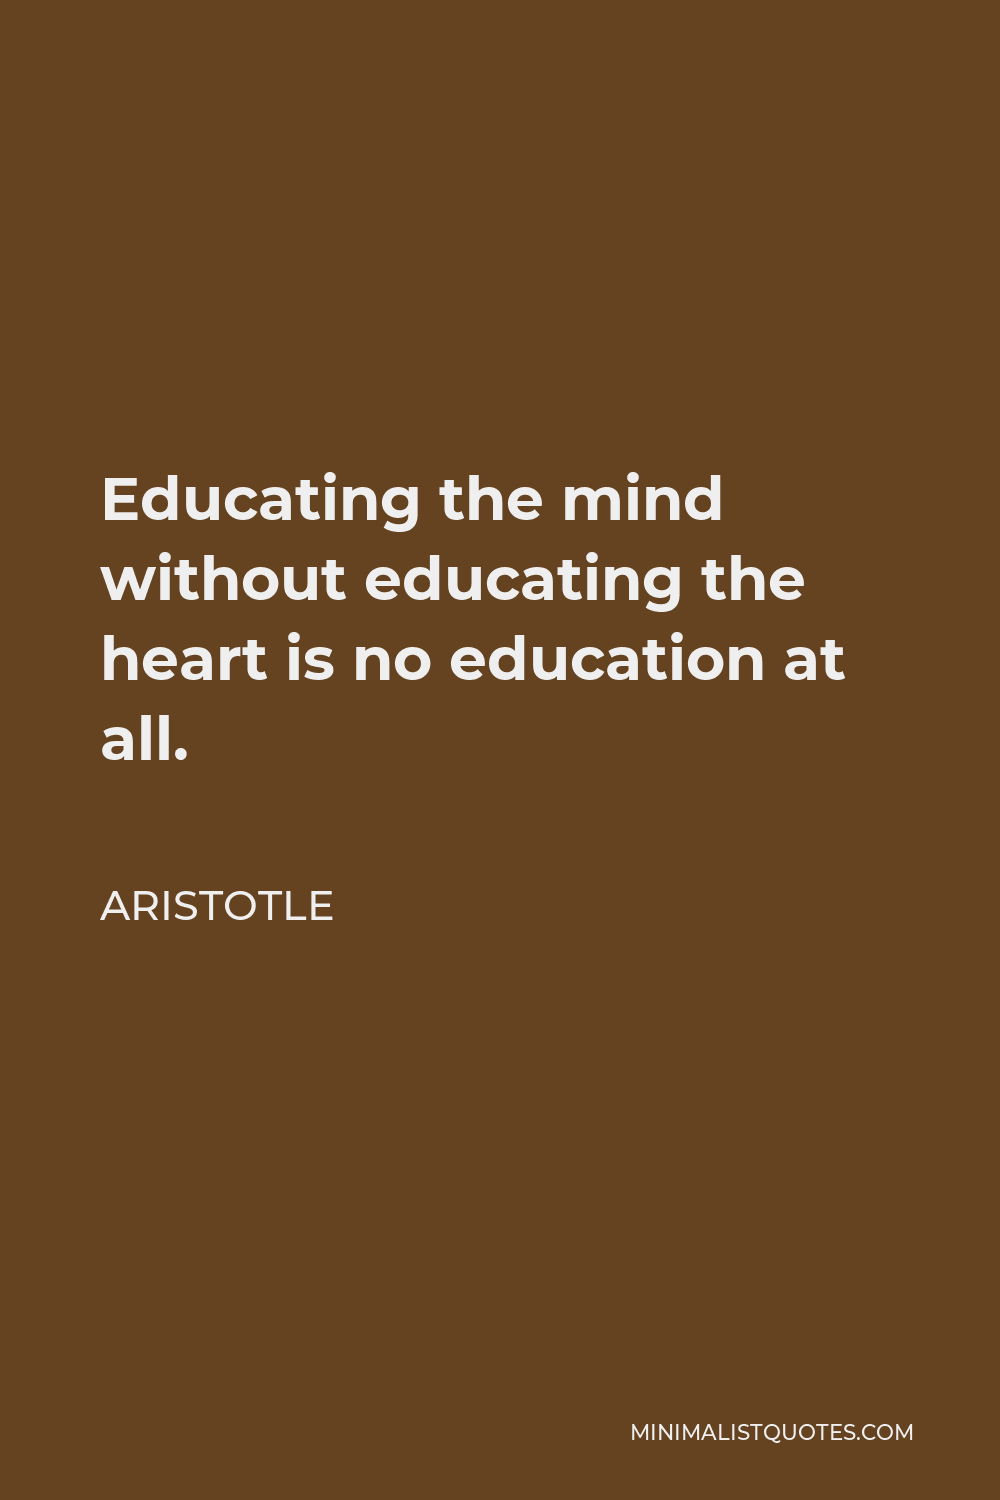 Aristotle Quote - Educating the mind without educating the heart is no education at all.